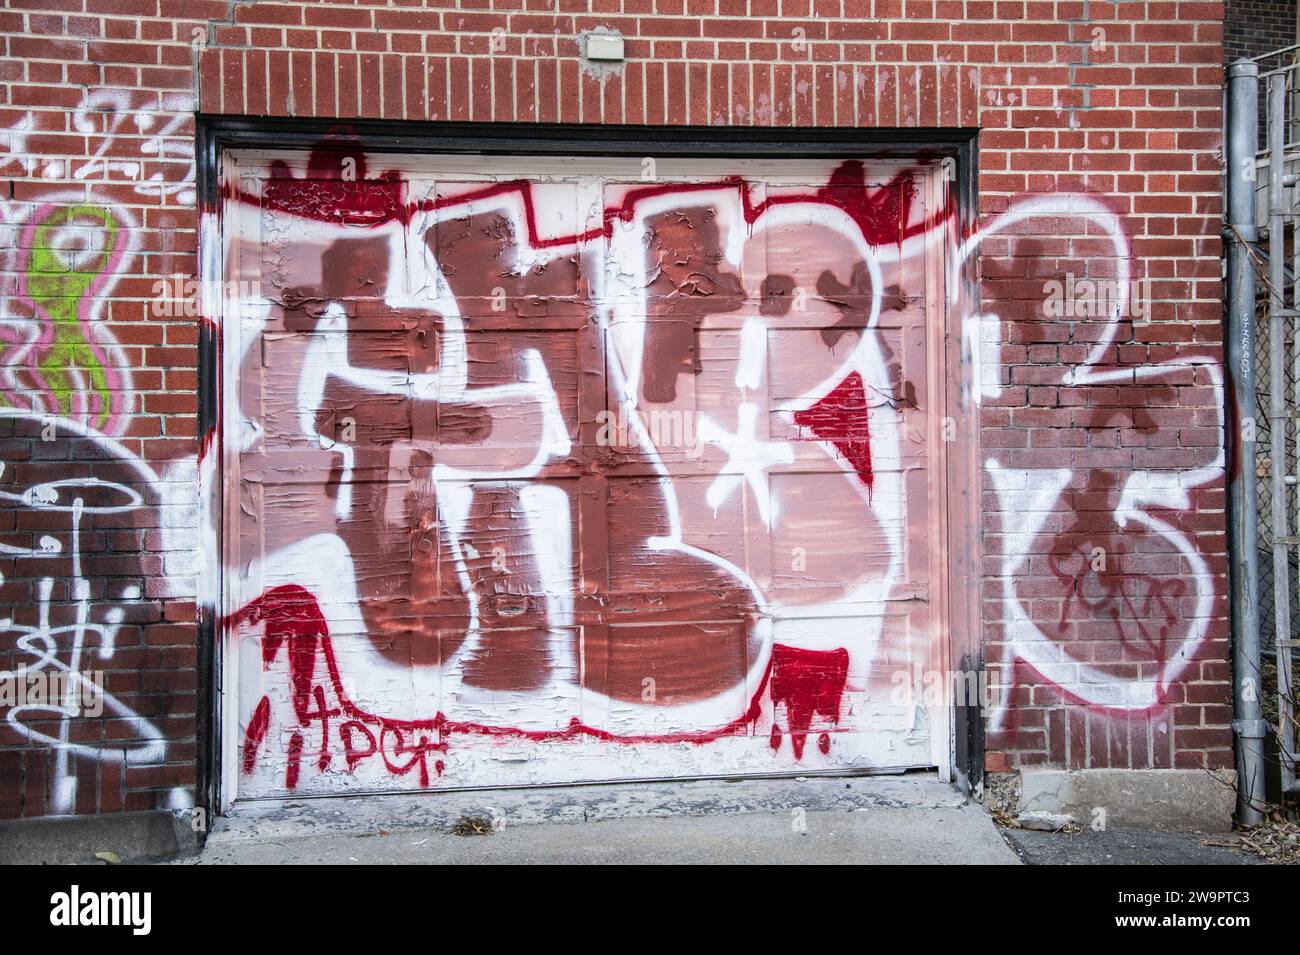 Graffiti on garage roll up door in downtown Montreal, Quebec, Canada Stock Photo